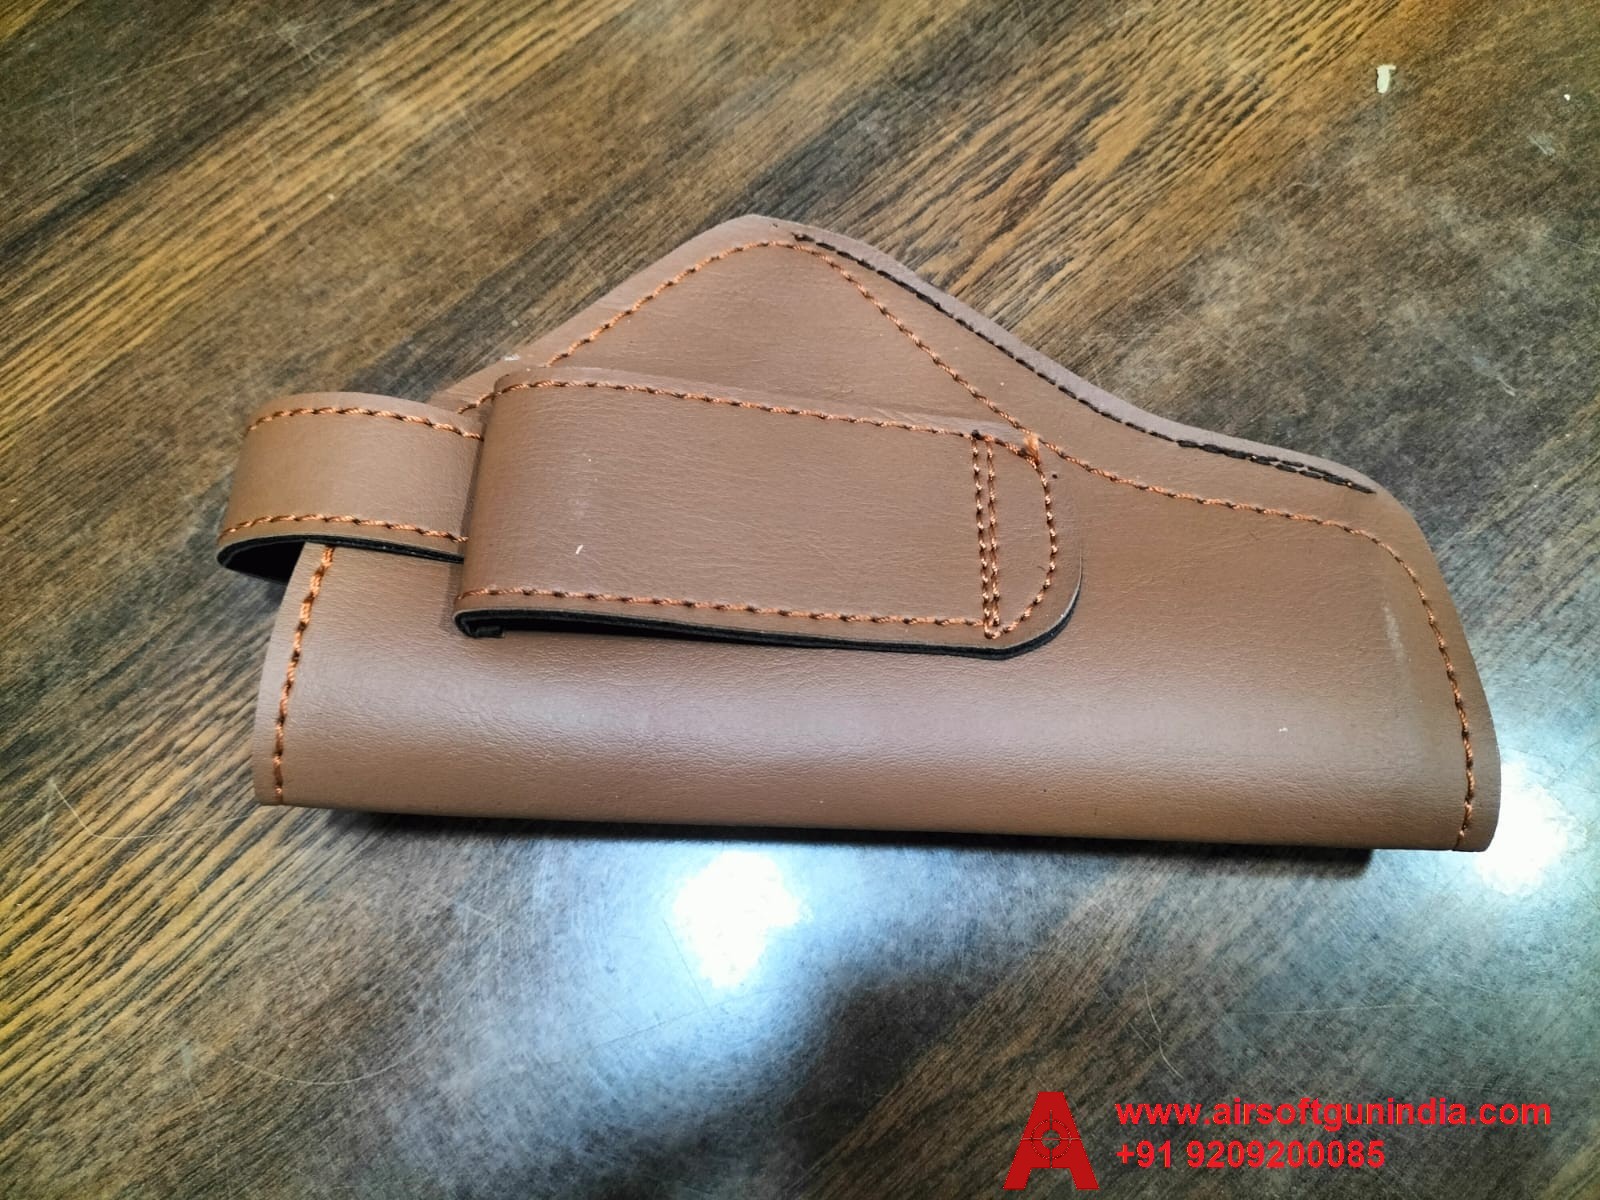 Gun Cover / Holster For Air Pistols And Revolvers In India BROWN